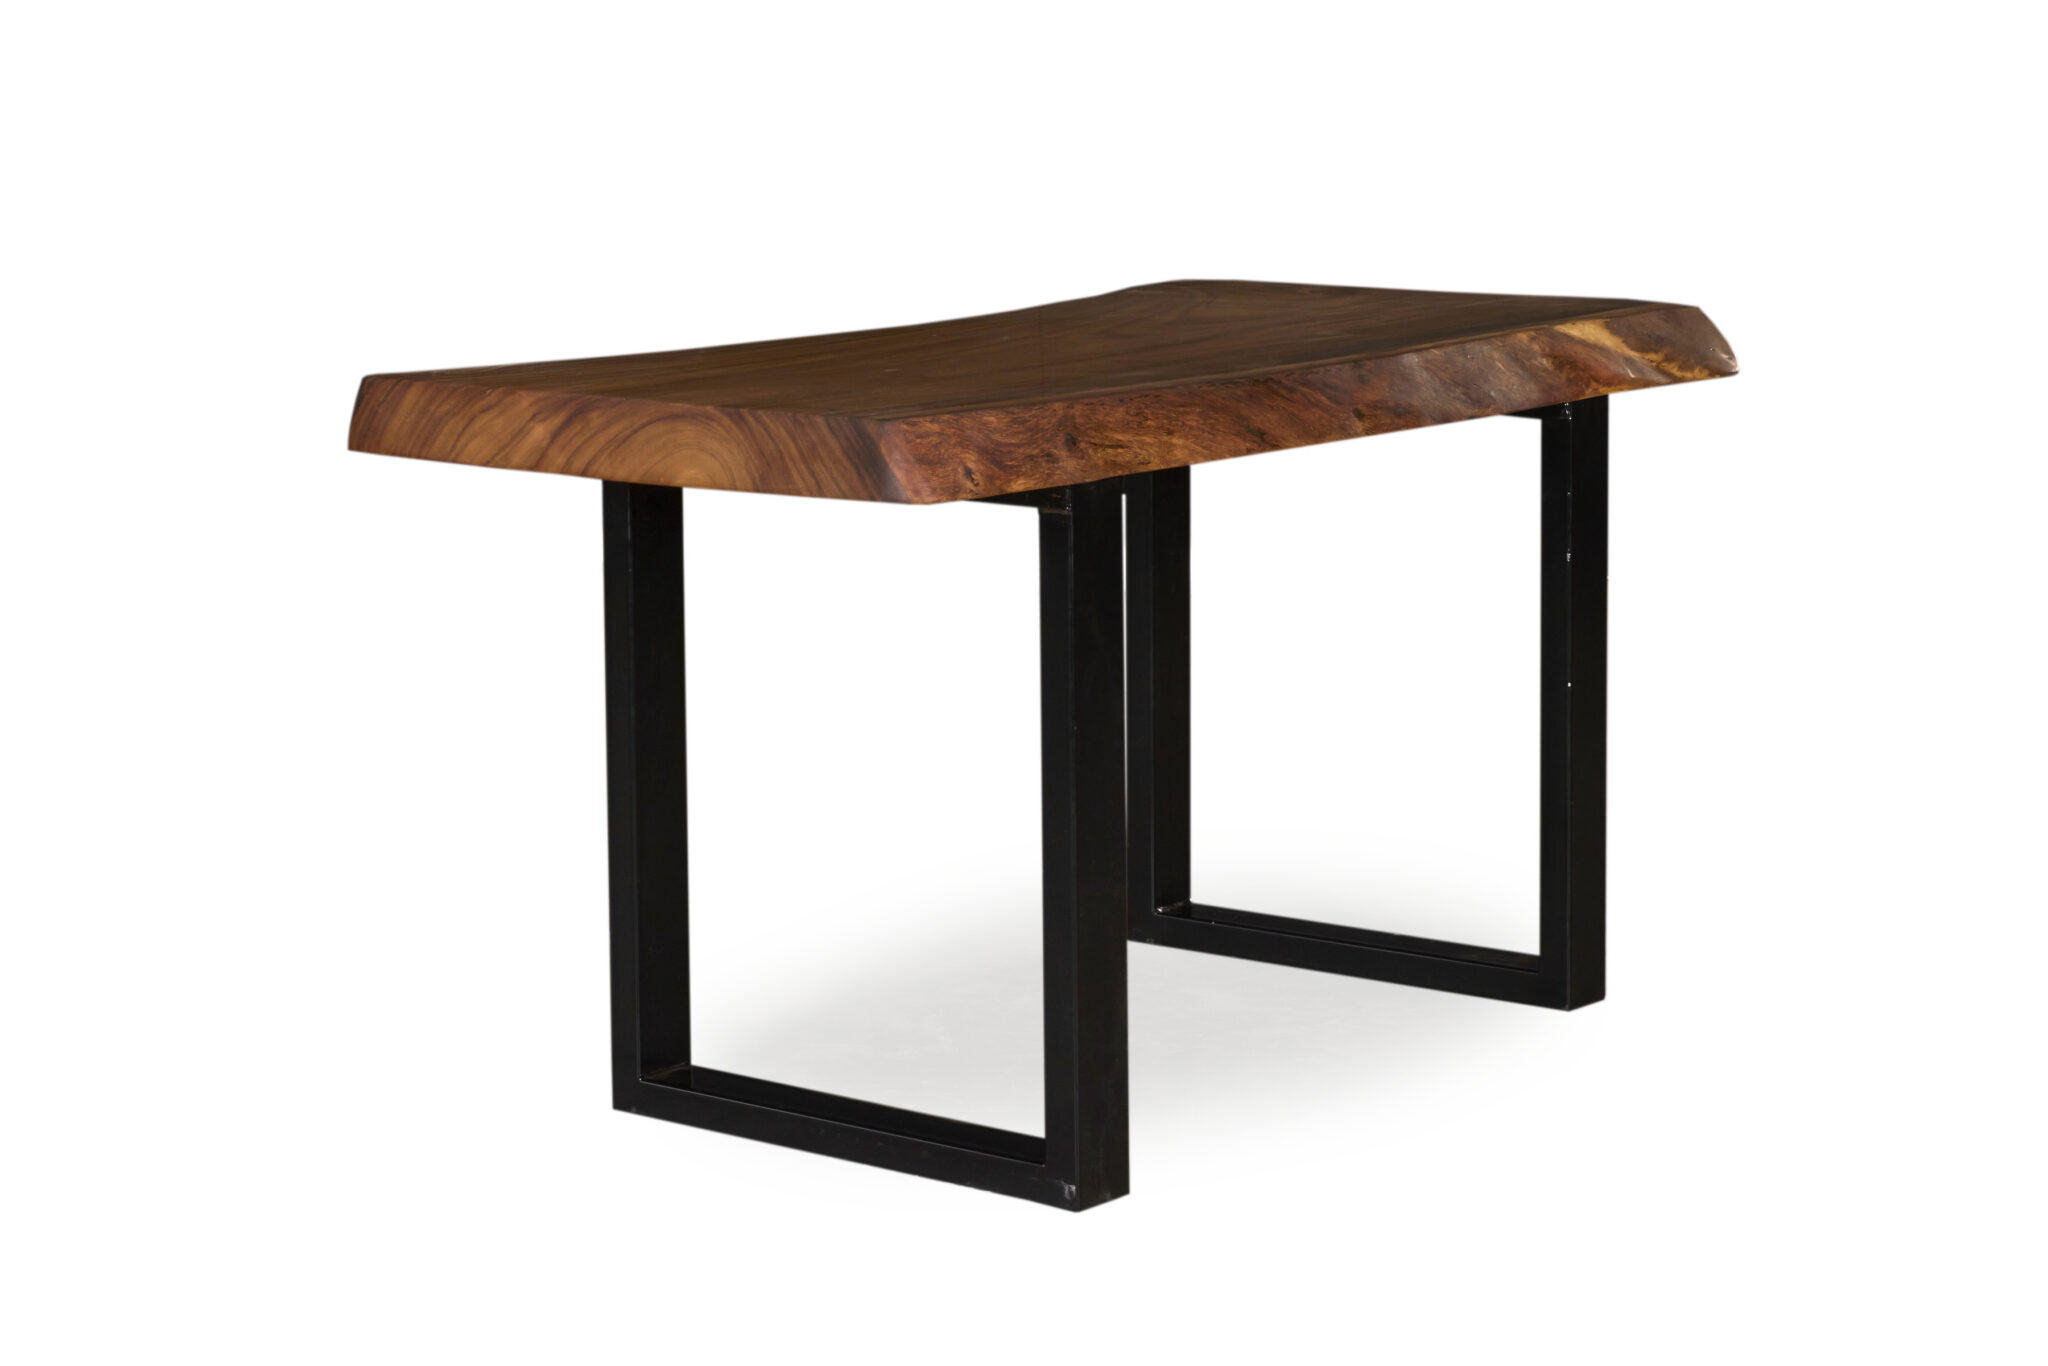 Pacific High Dining Table with natural edge and steel U-leg base.